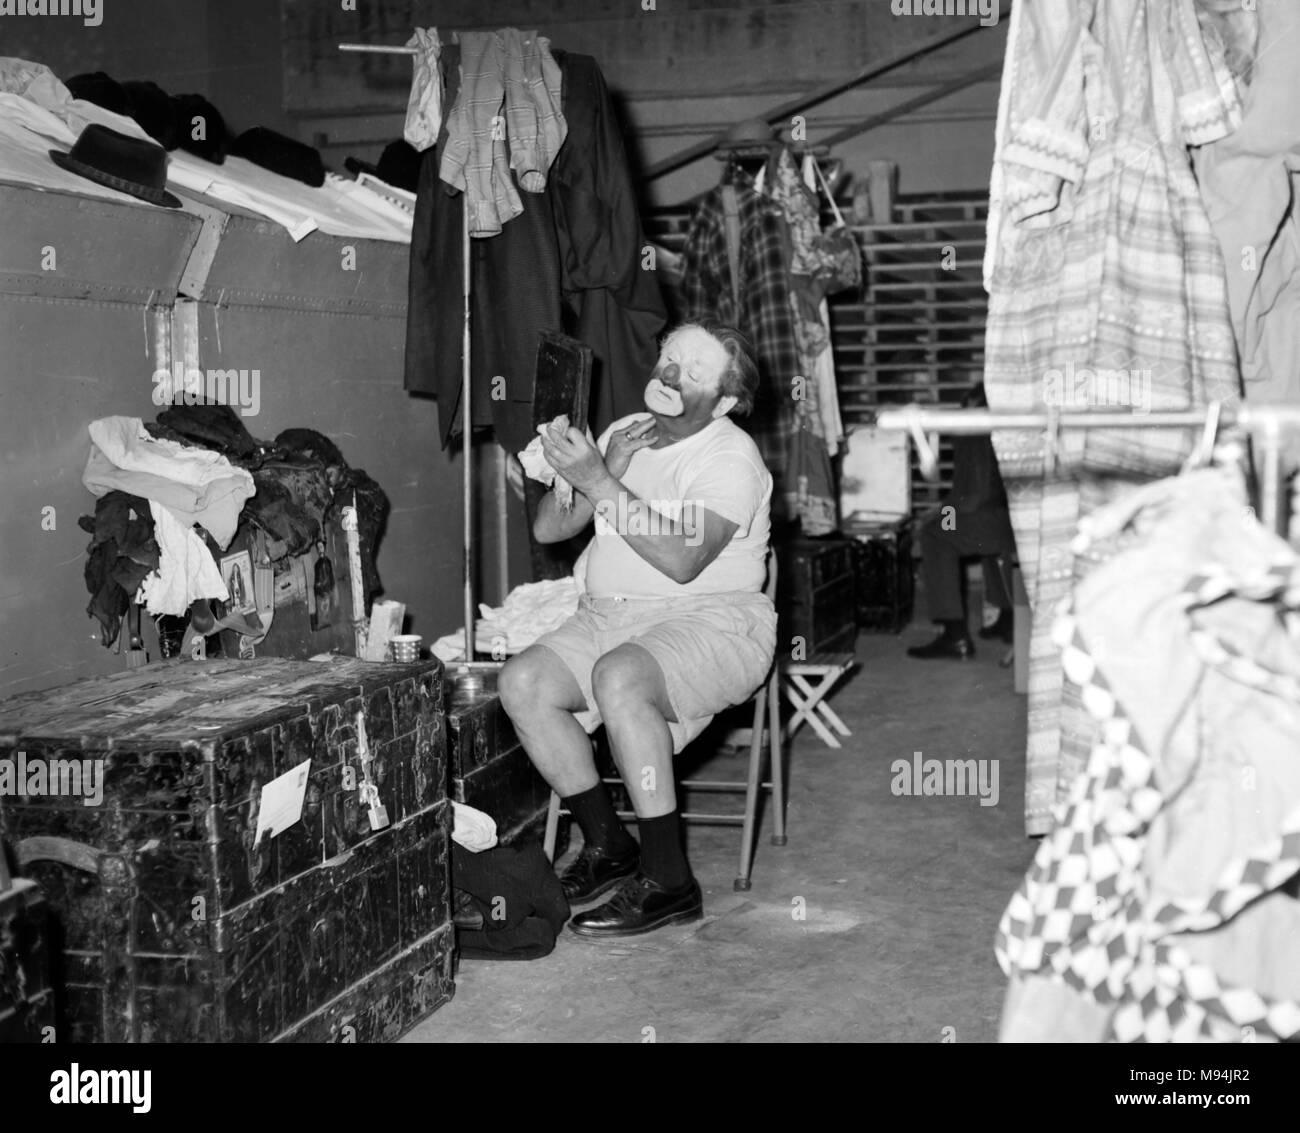 Otto Griebling prepares applies his make-up before a performance with Ringling Bros. and Barnum & Bailey Circus in Georgia in 1962.  He and Emmet Kelly were among the best loved clowns in the United States in the 20th century.  He was best known for a gag with a shrinking block of ice. Stock Photo